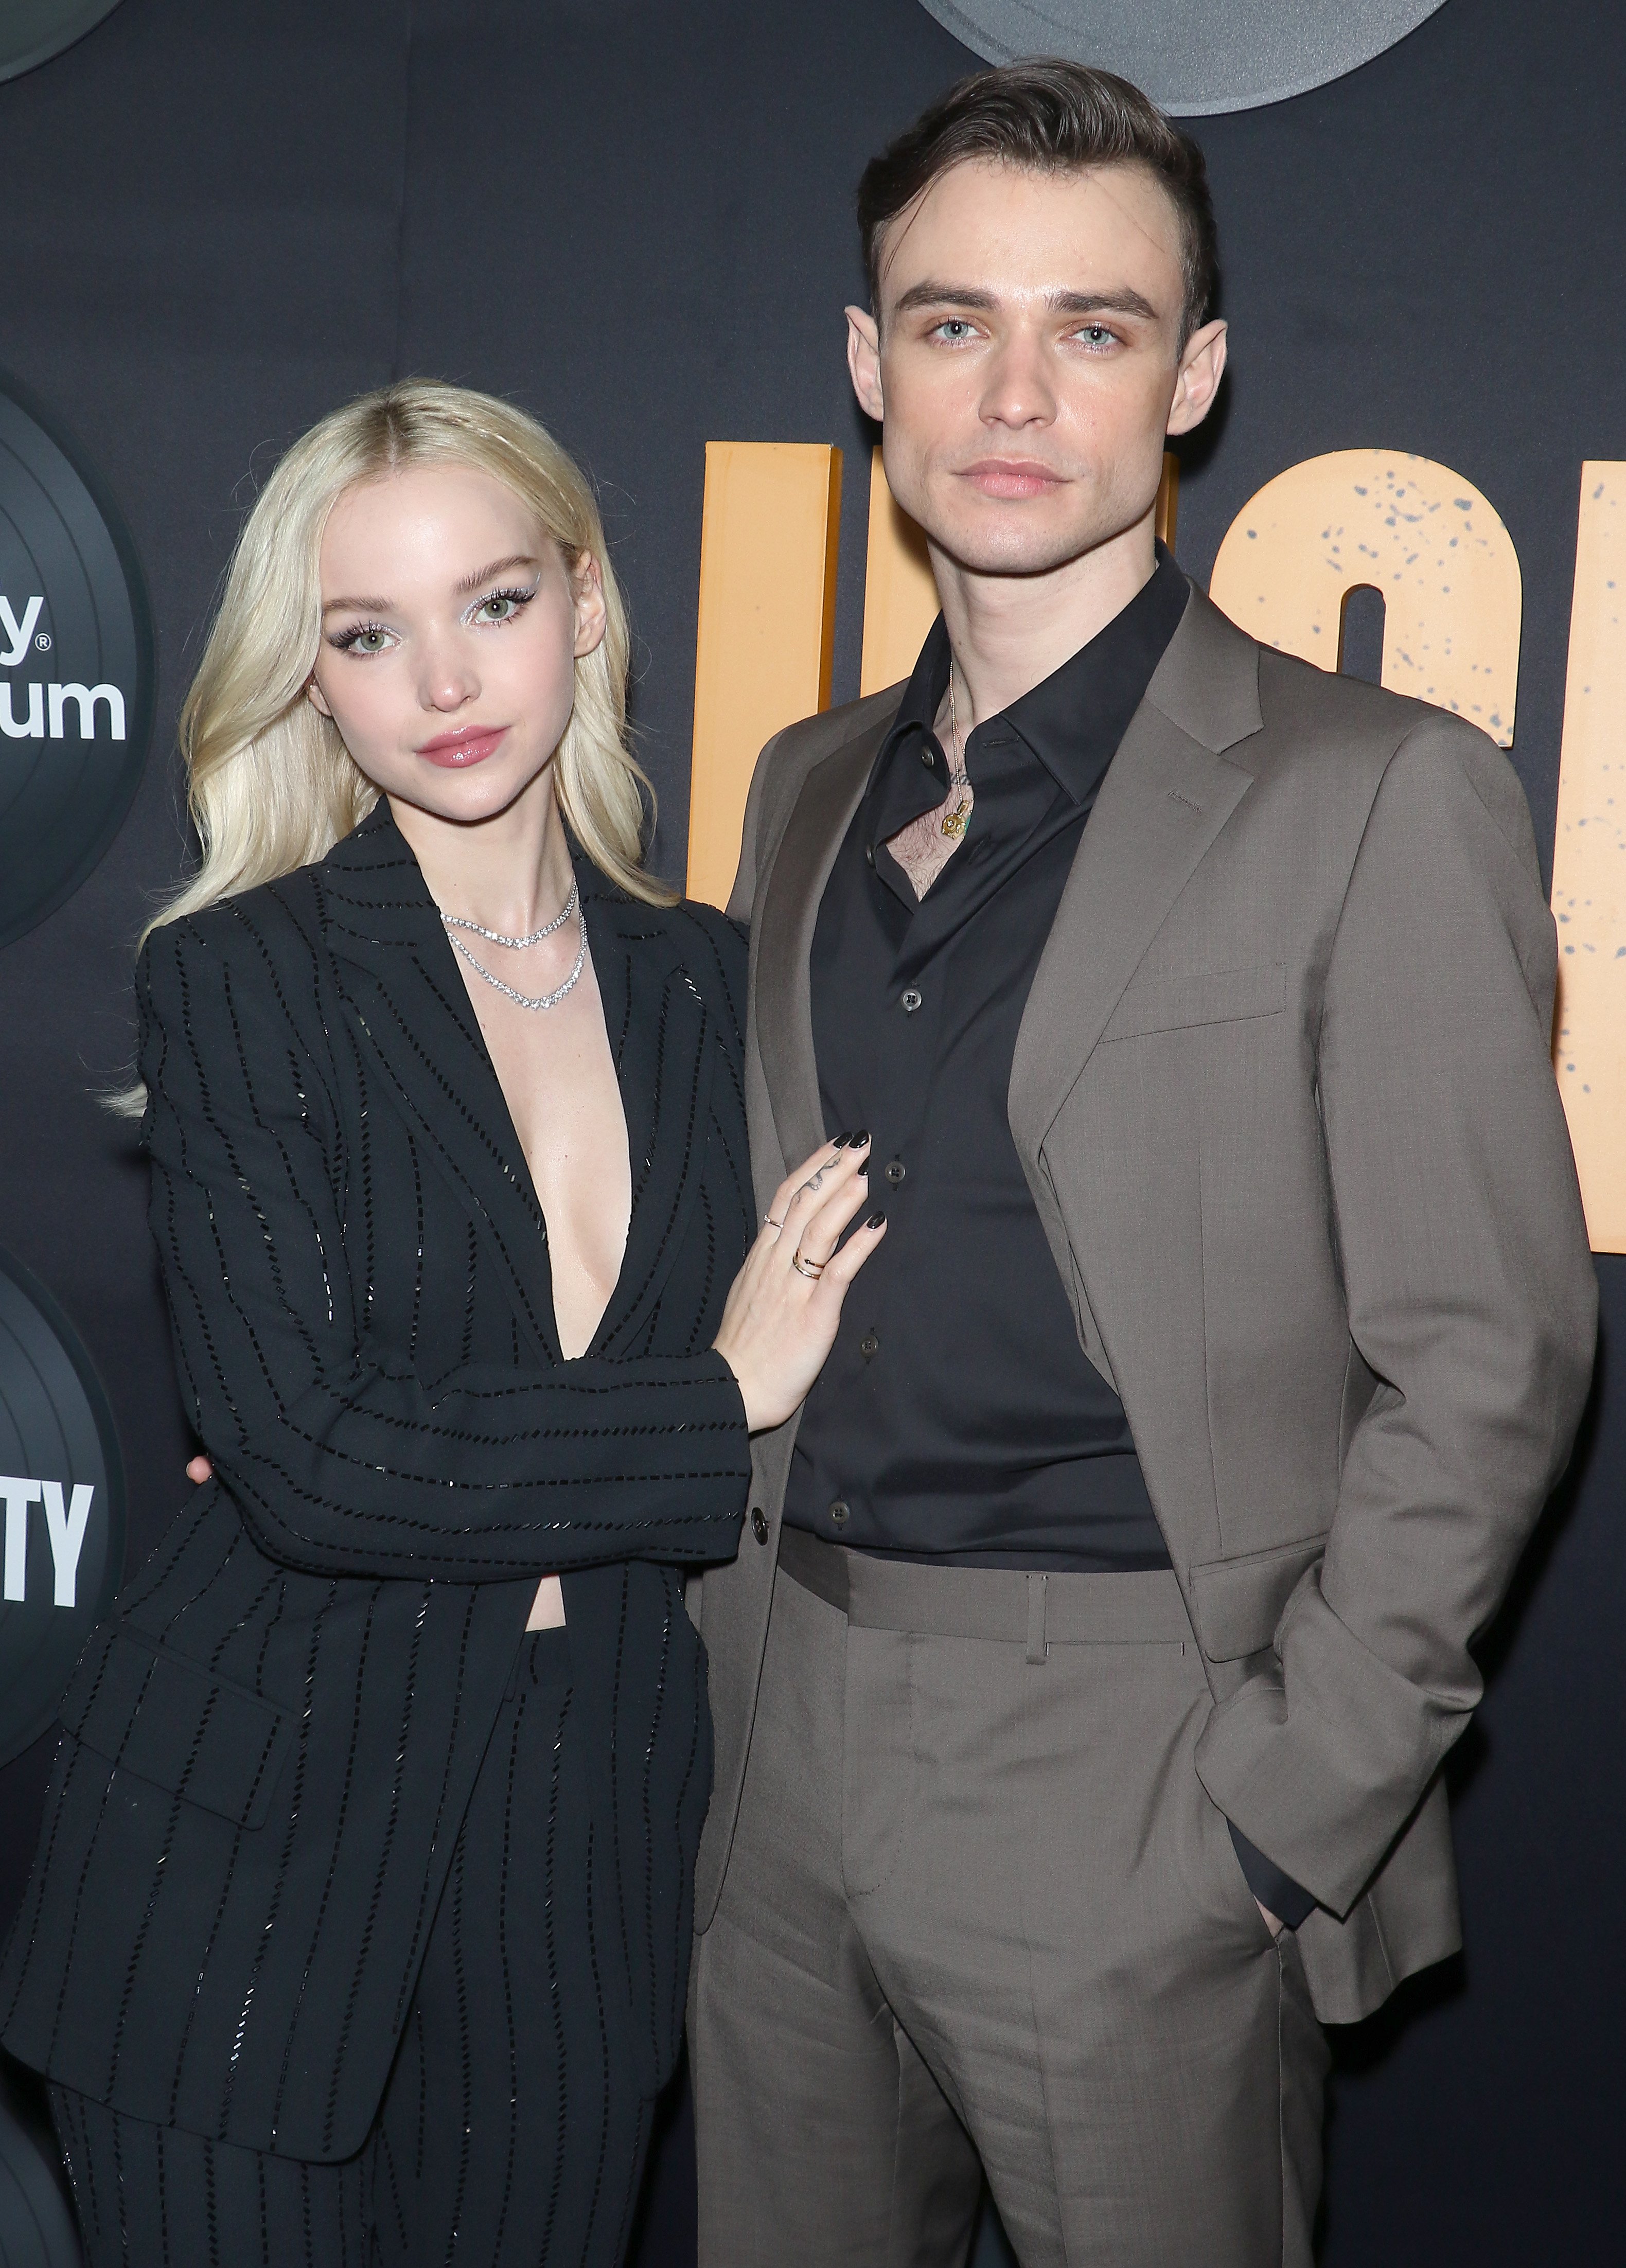 Dove Cameron and Thomas Doherty at Metrograph on February 13, 2020, in New York City. I Source: Getty Images